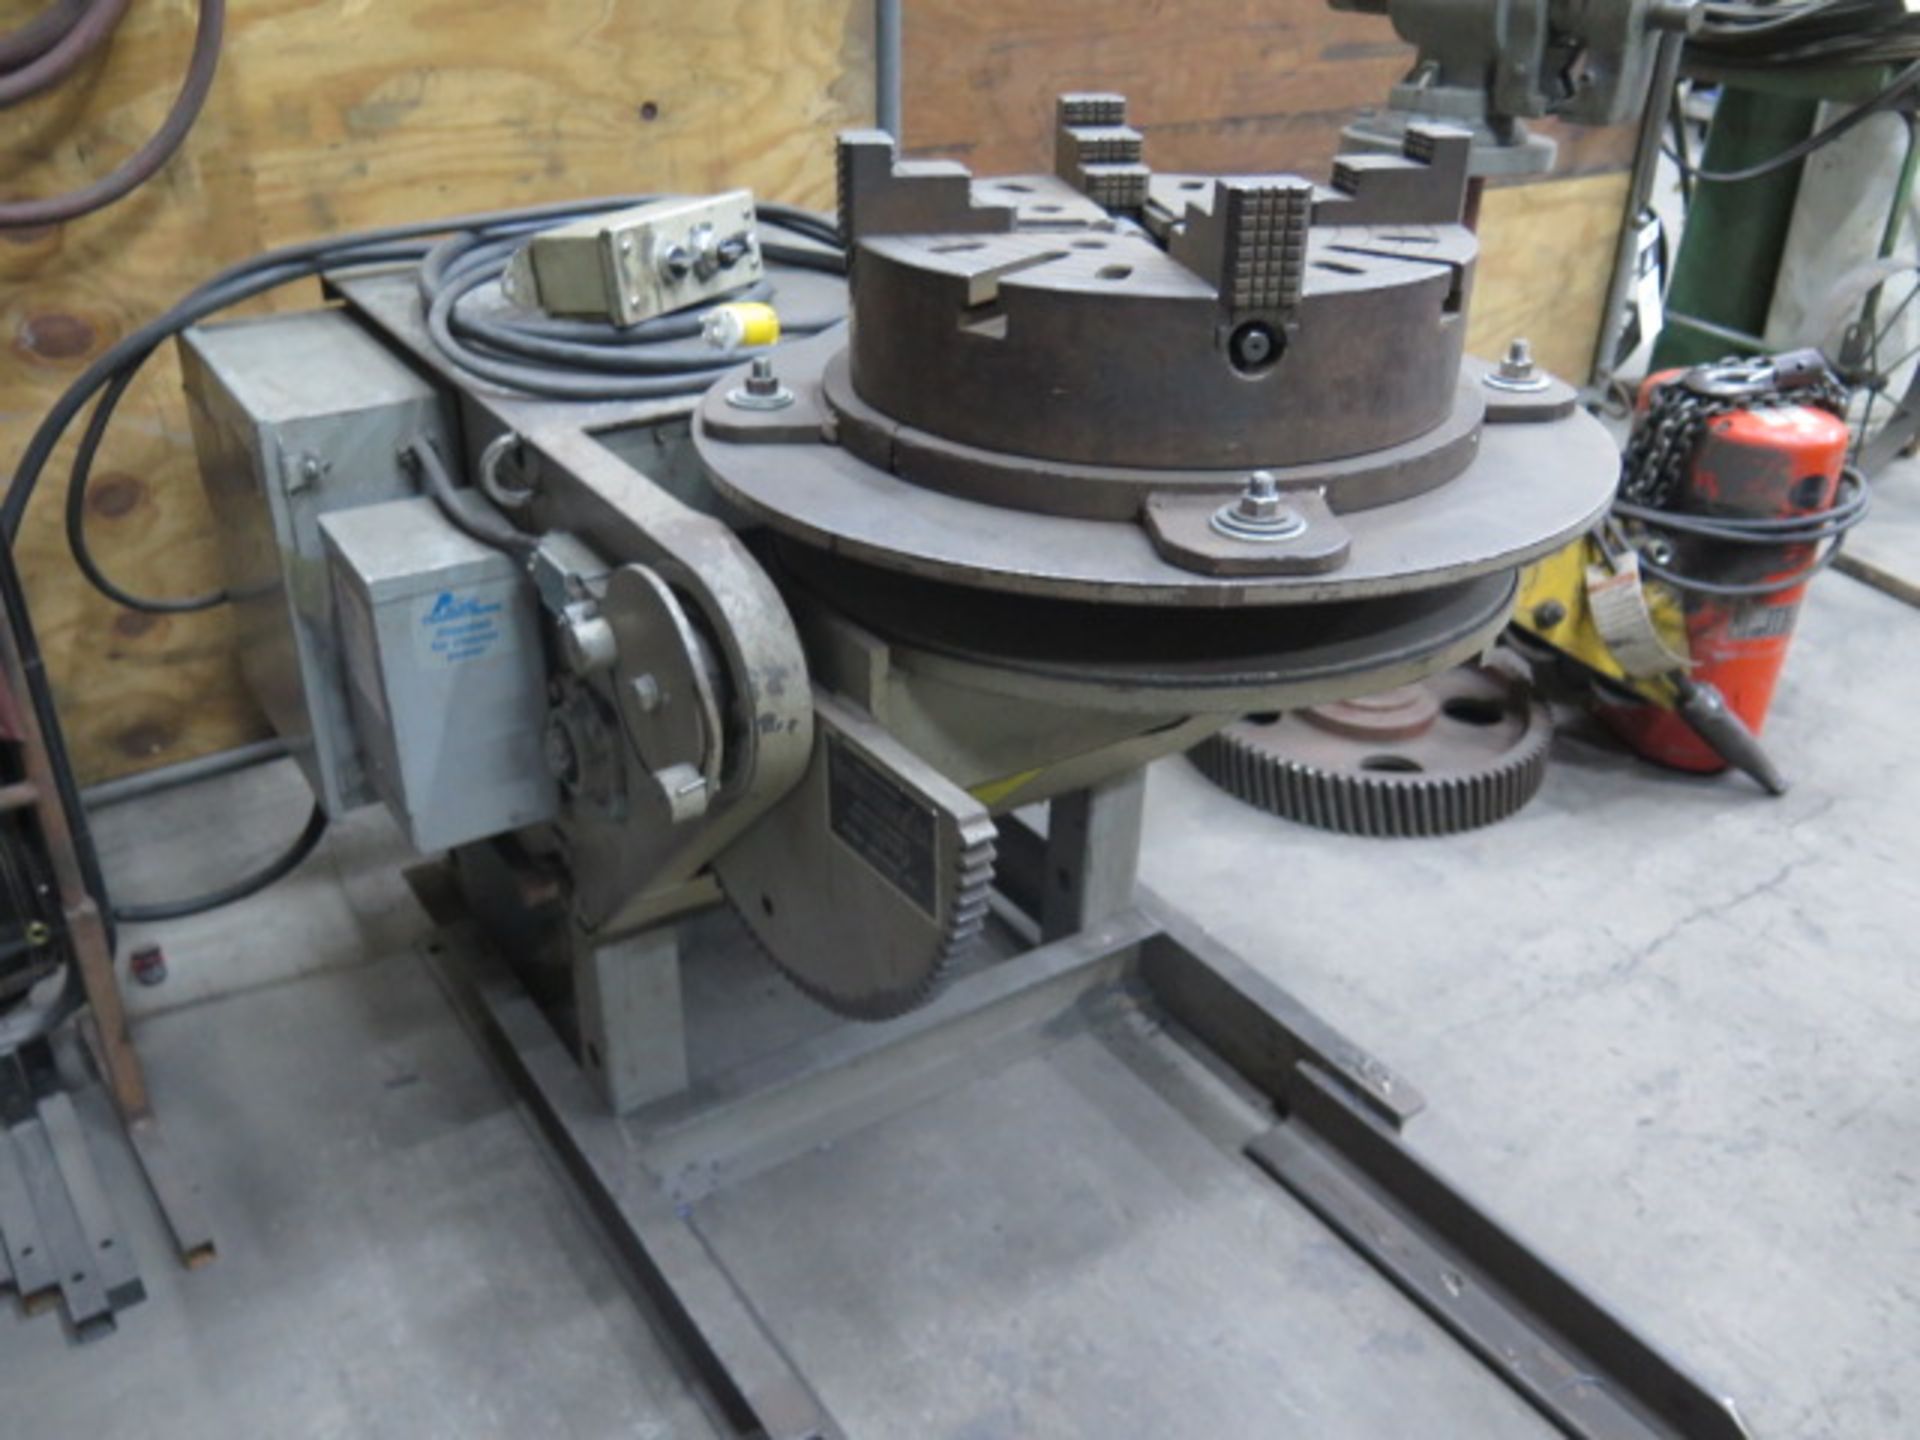 Koike Aronson 24” Welding Positioner s/n 011500 w/ 15” 4-Jaw Chuck (SOLD AS-IS - NO WARRANTY) - Image 4 of 7